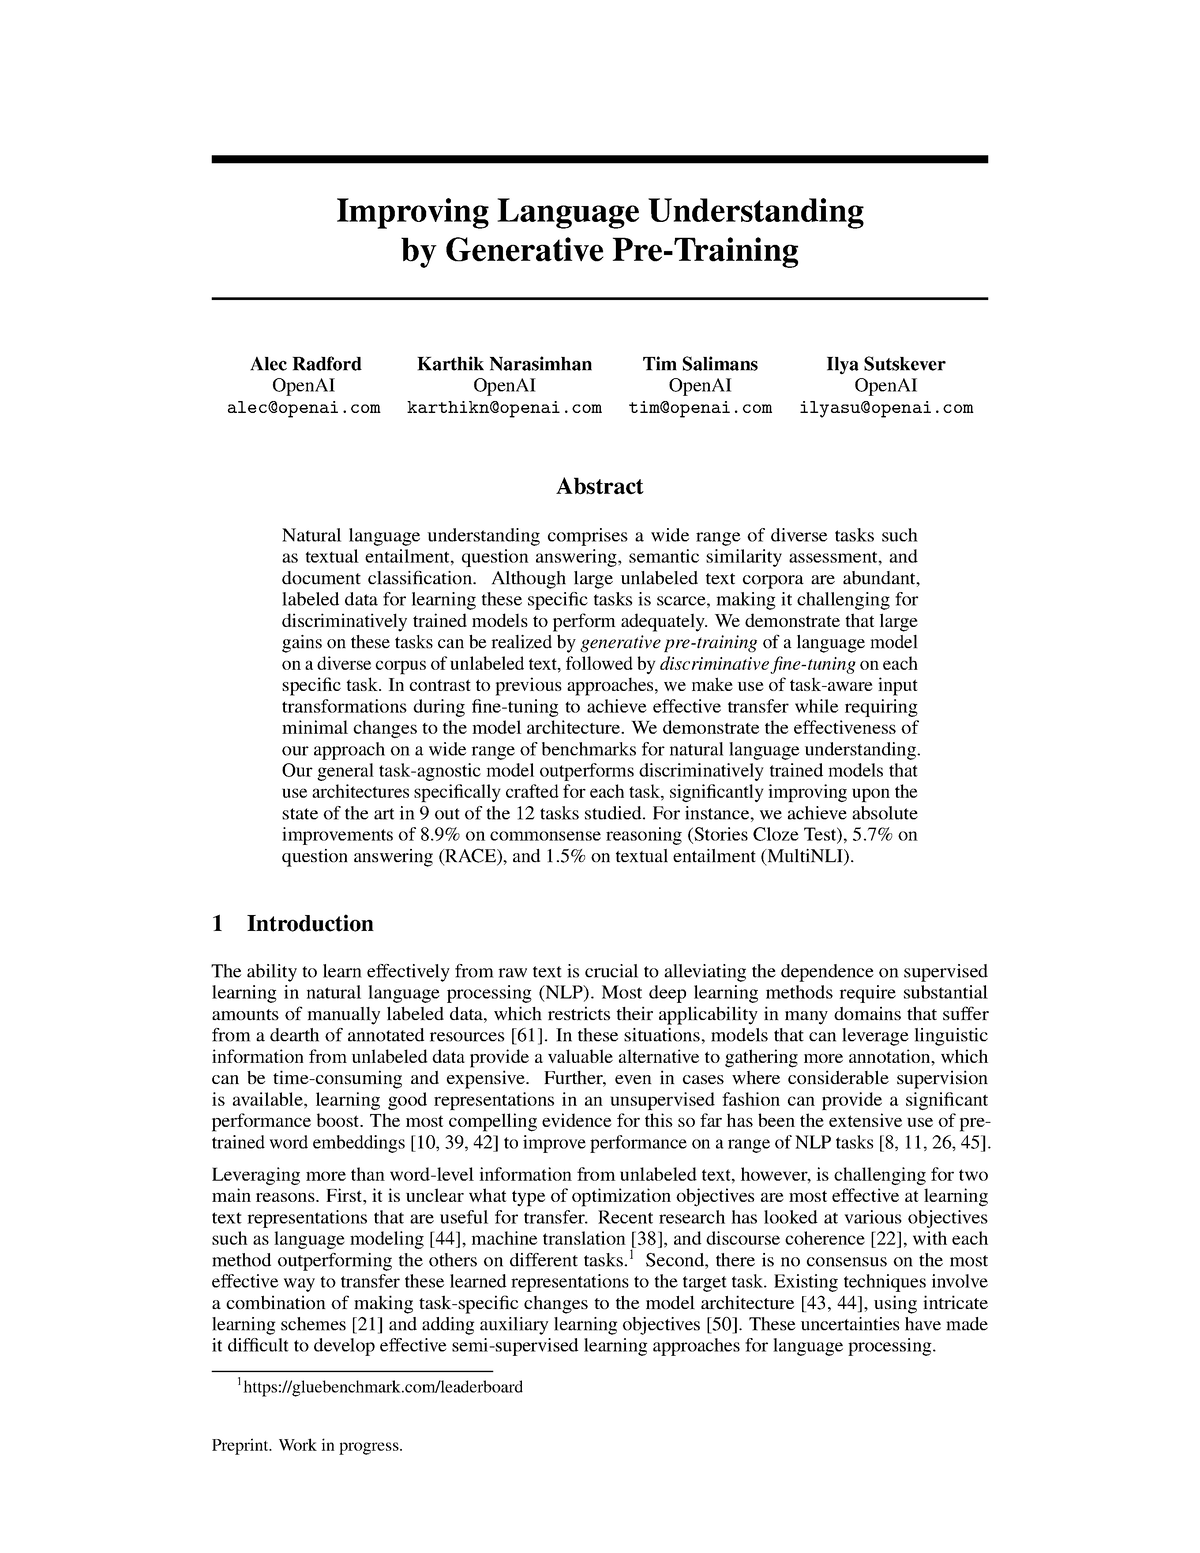 research paper related to language